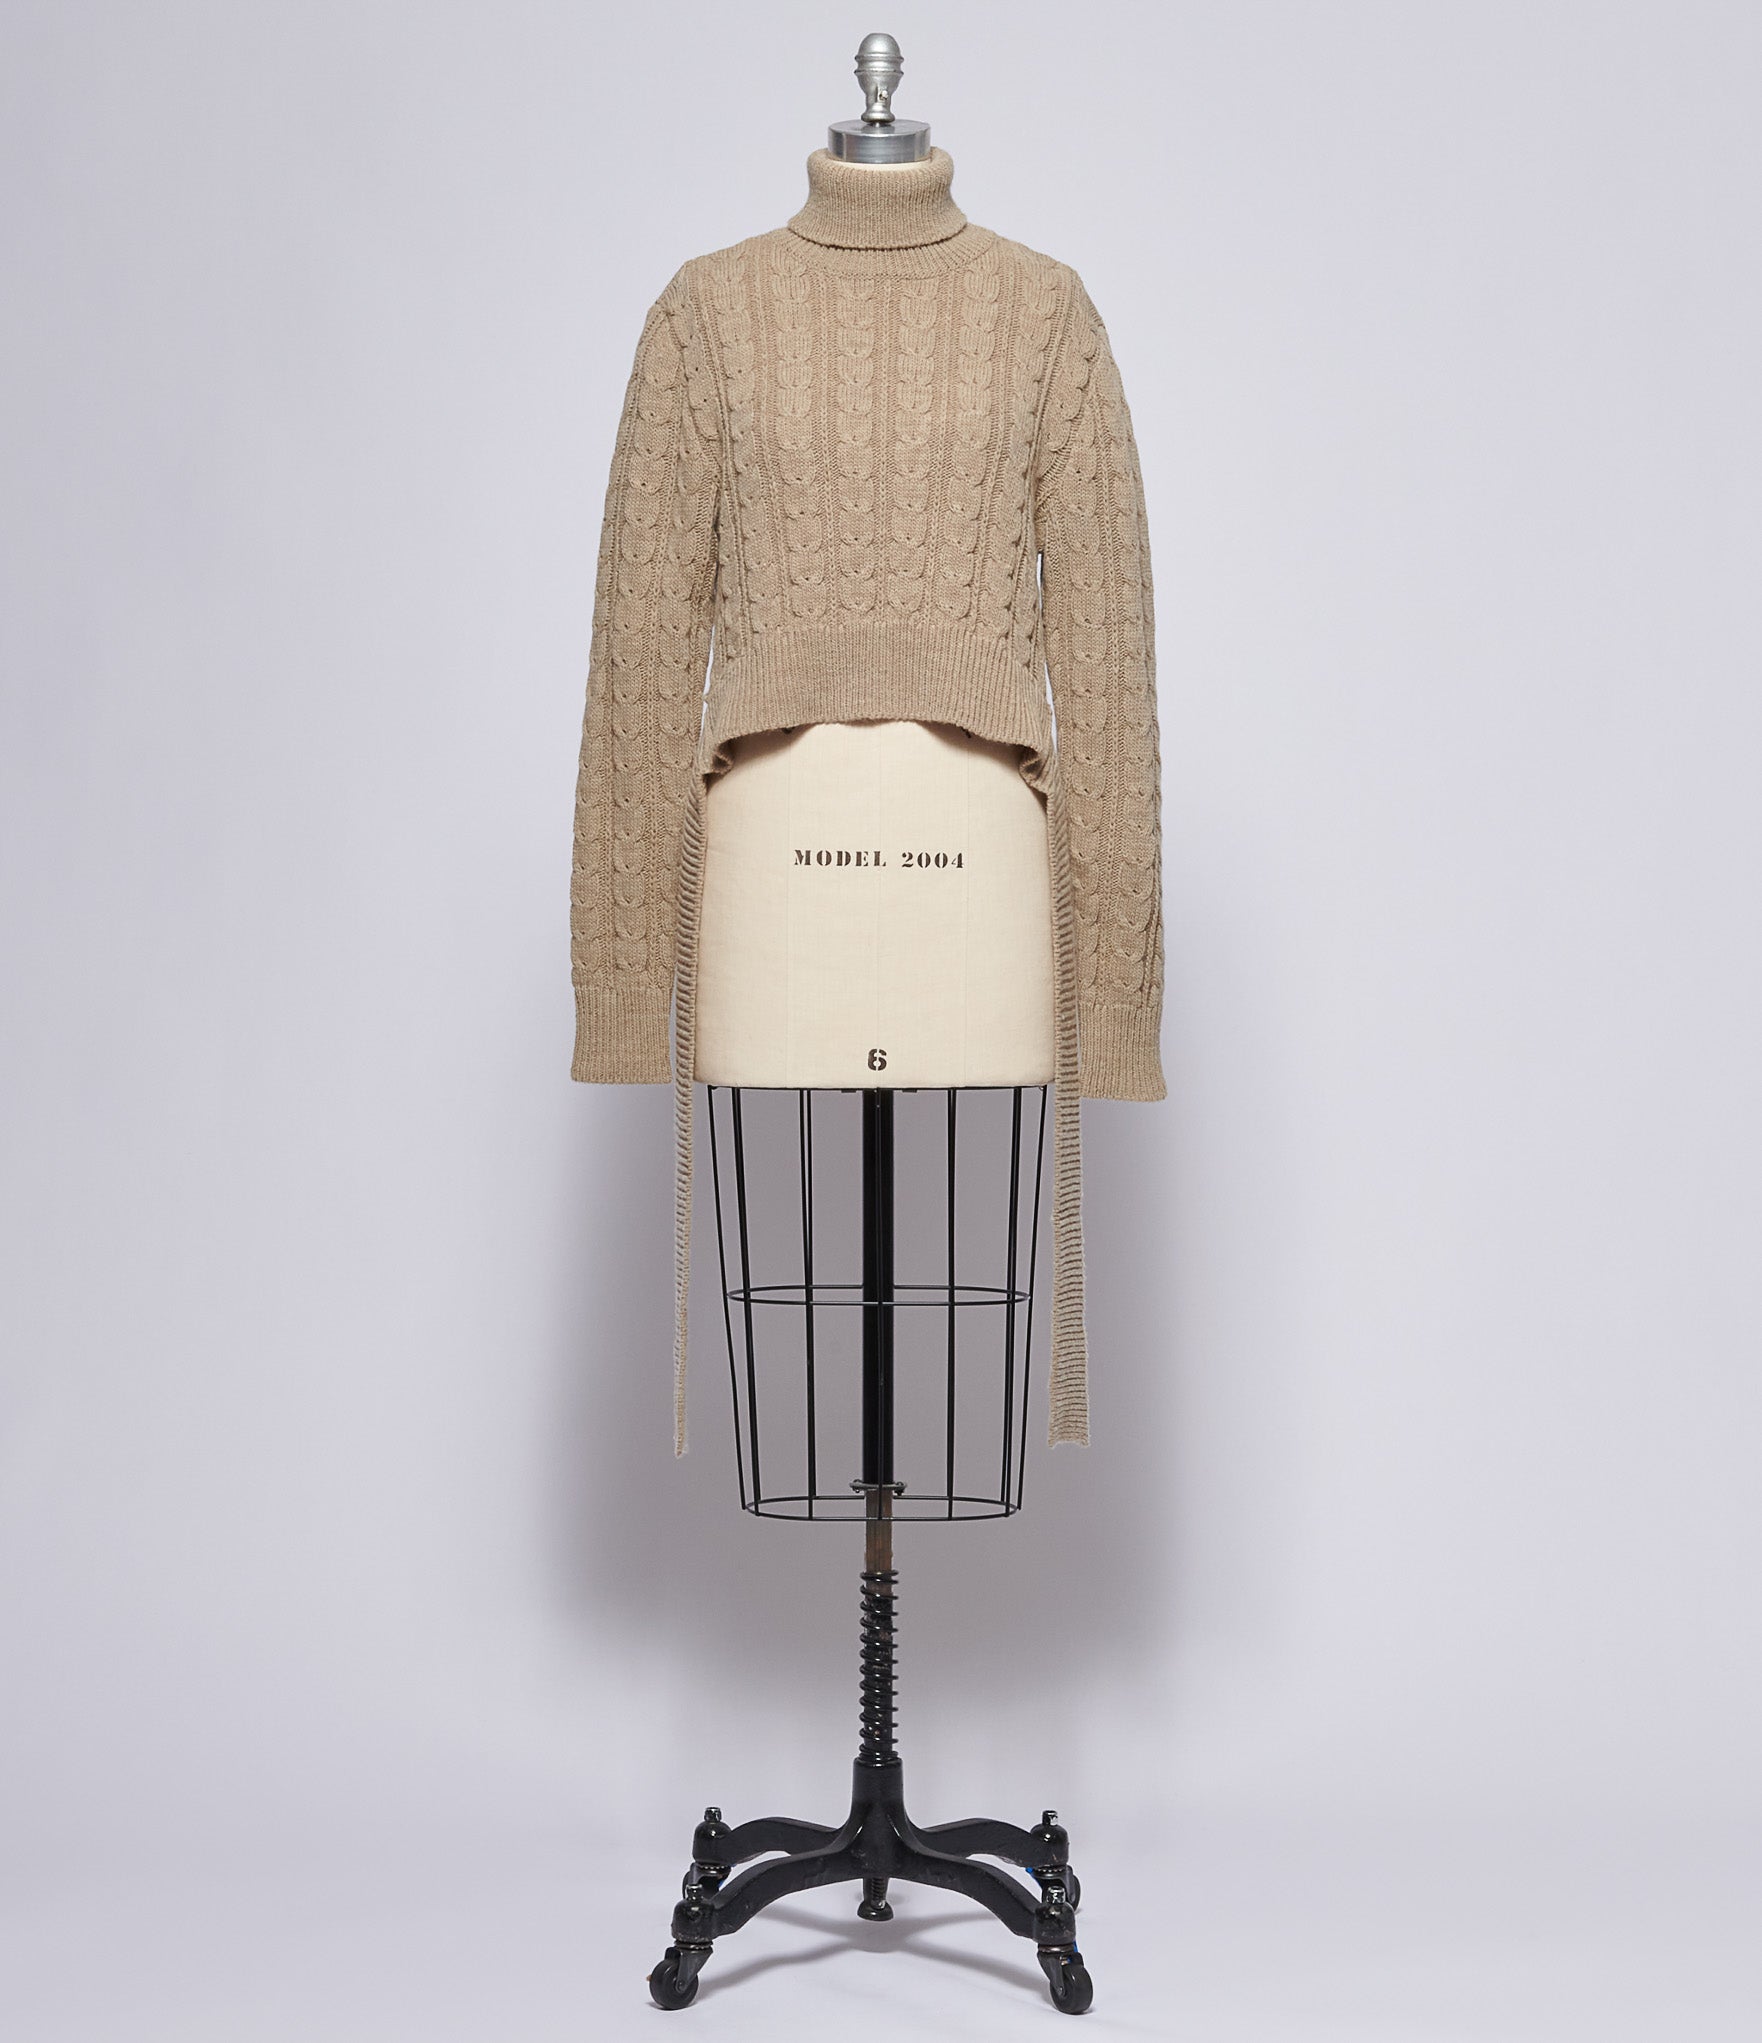 Black Cable Knit Sweater by Maison Margiela on Sale